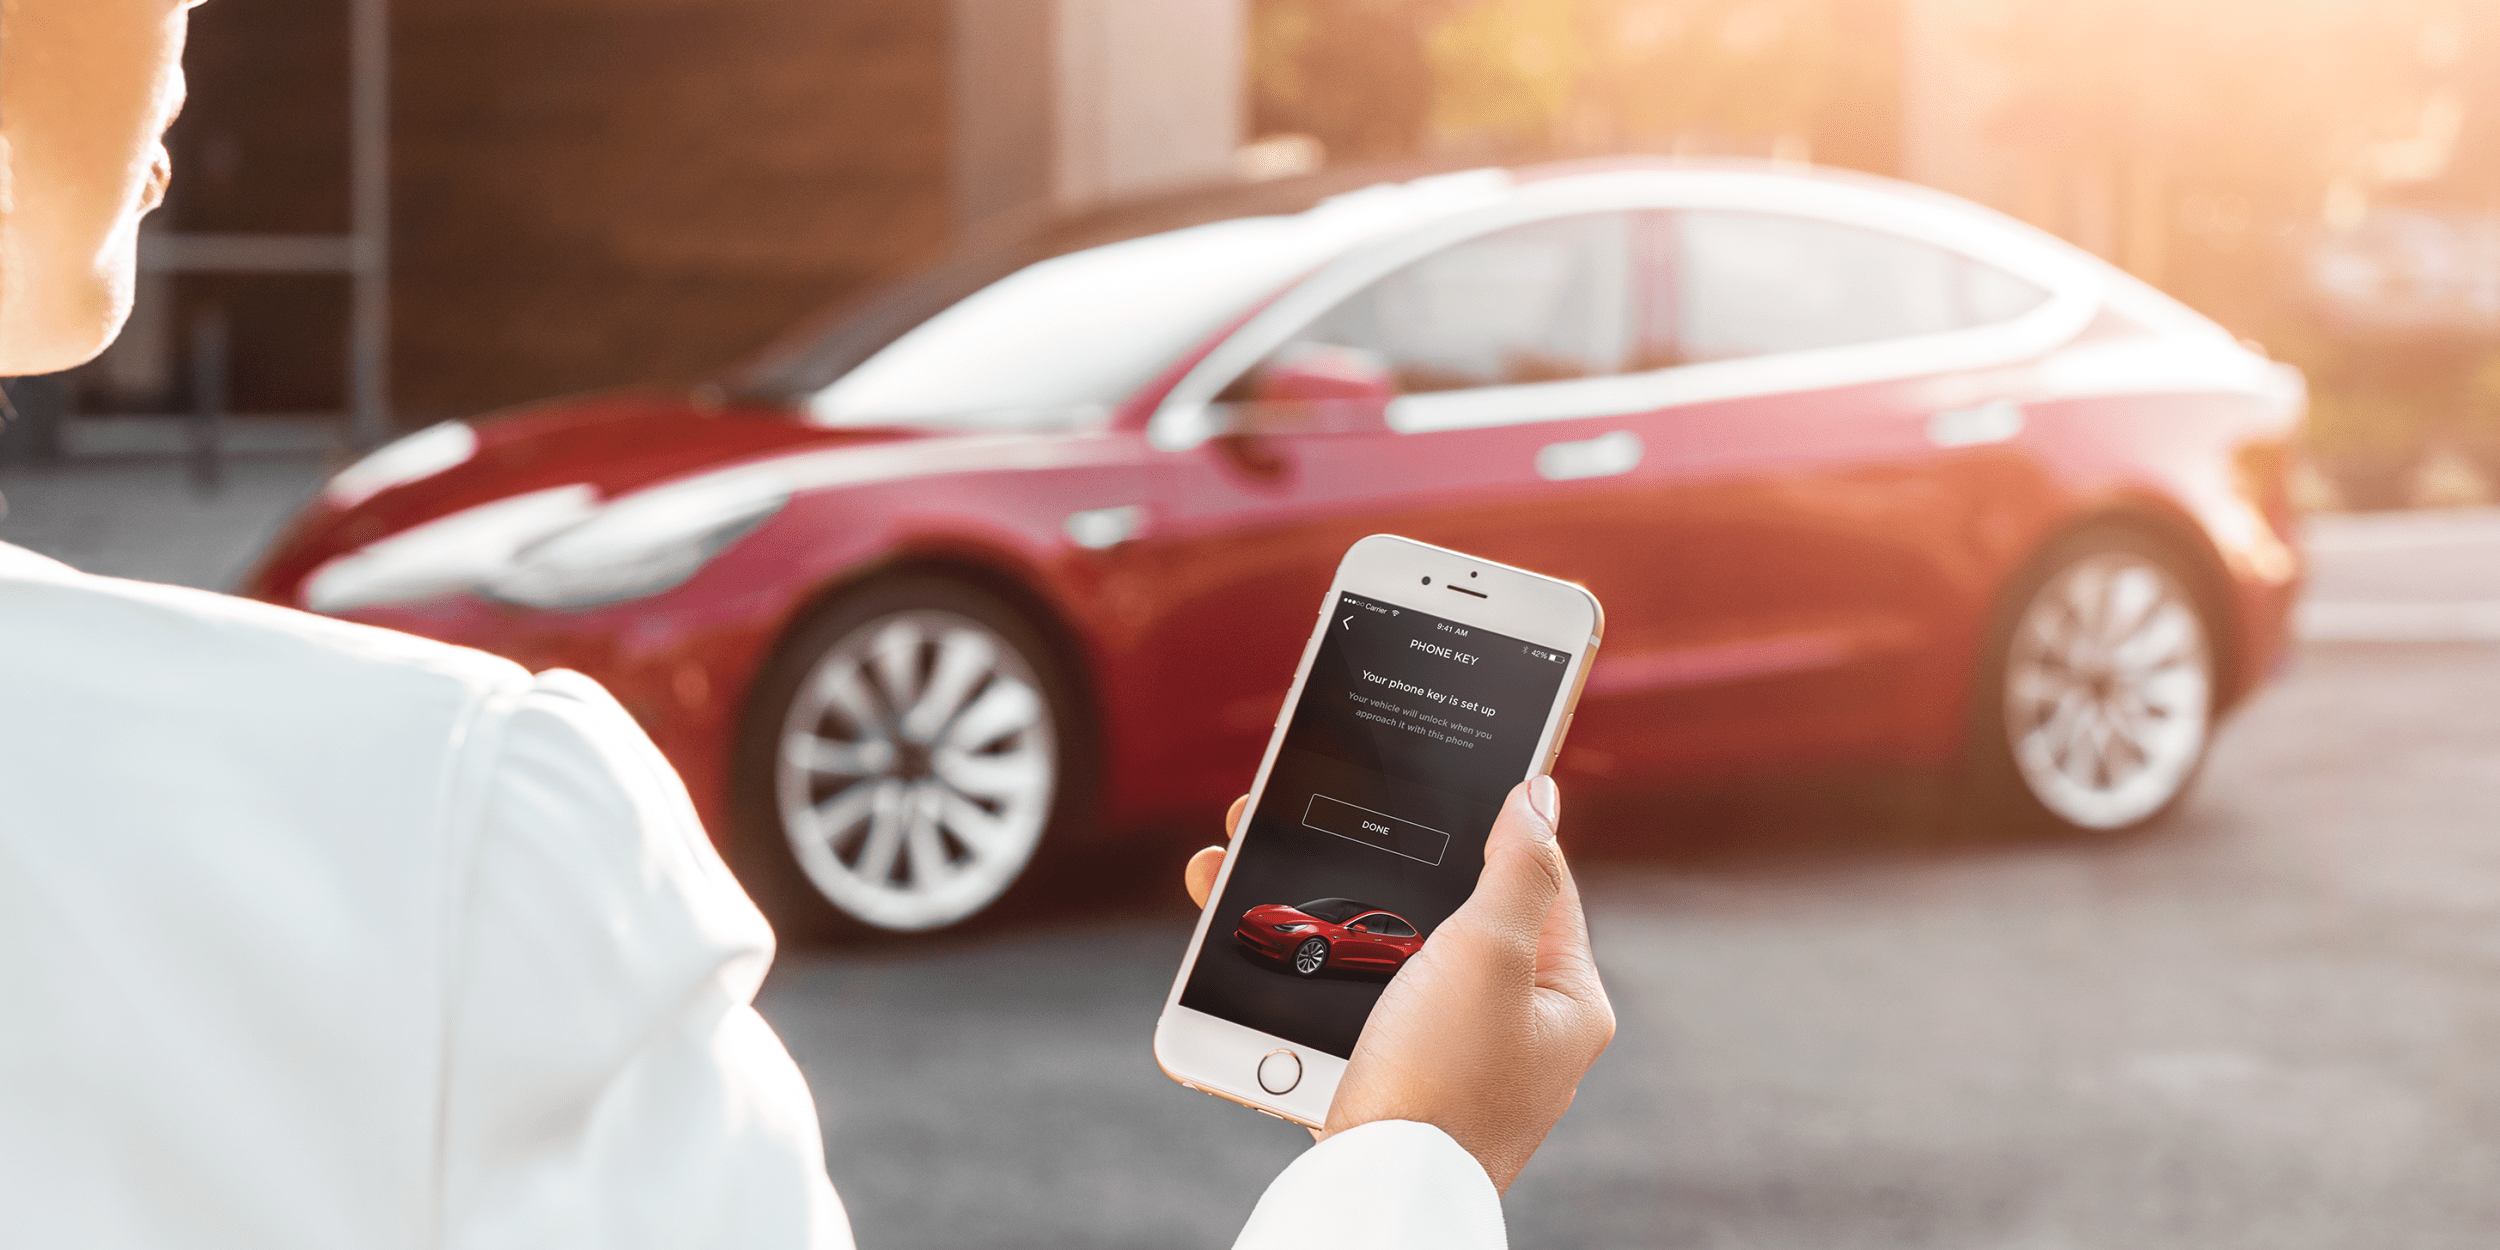 Tesla Sharing App Sharing features - Tesla integrating Vehicle Sharing features in its app